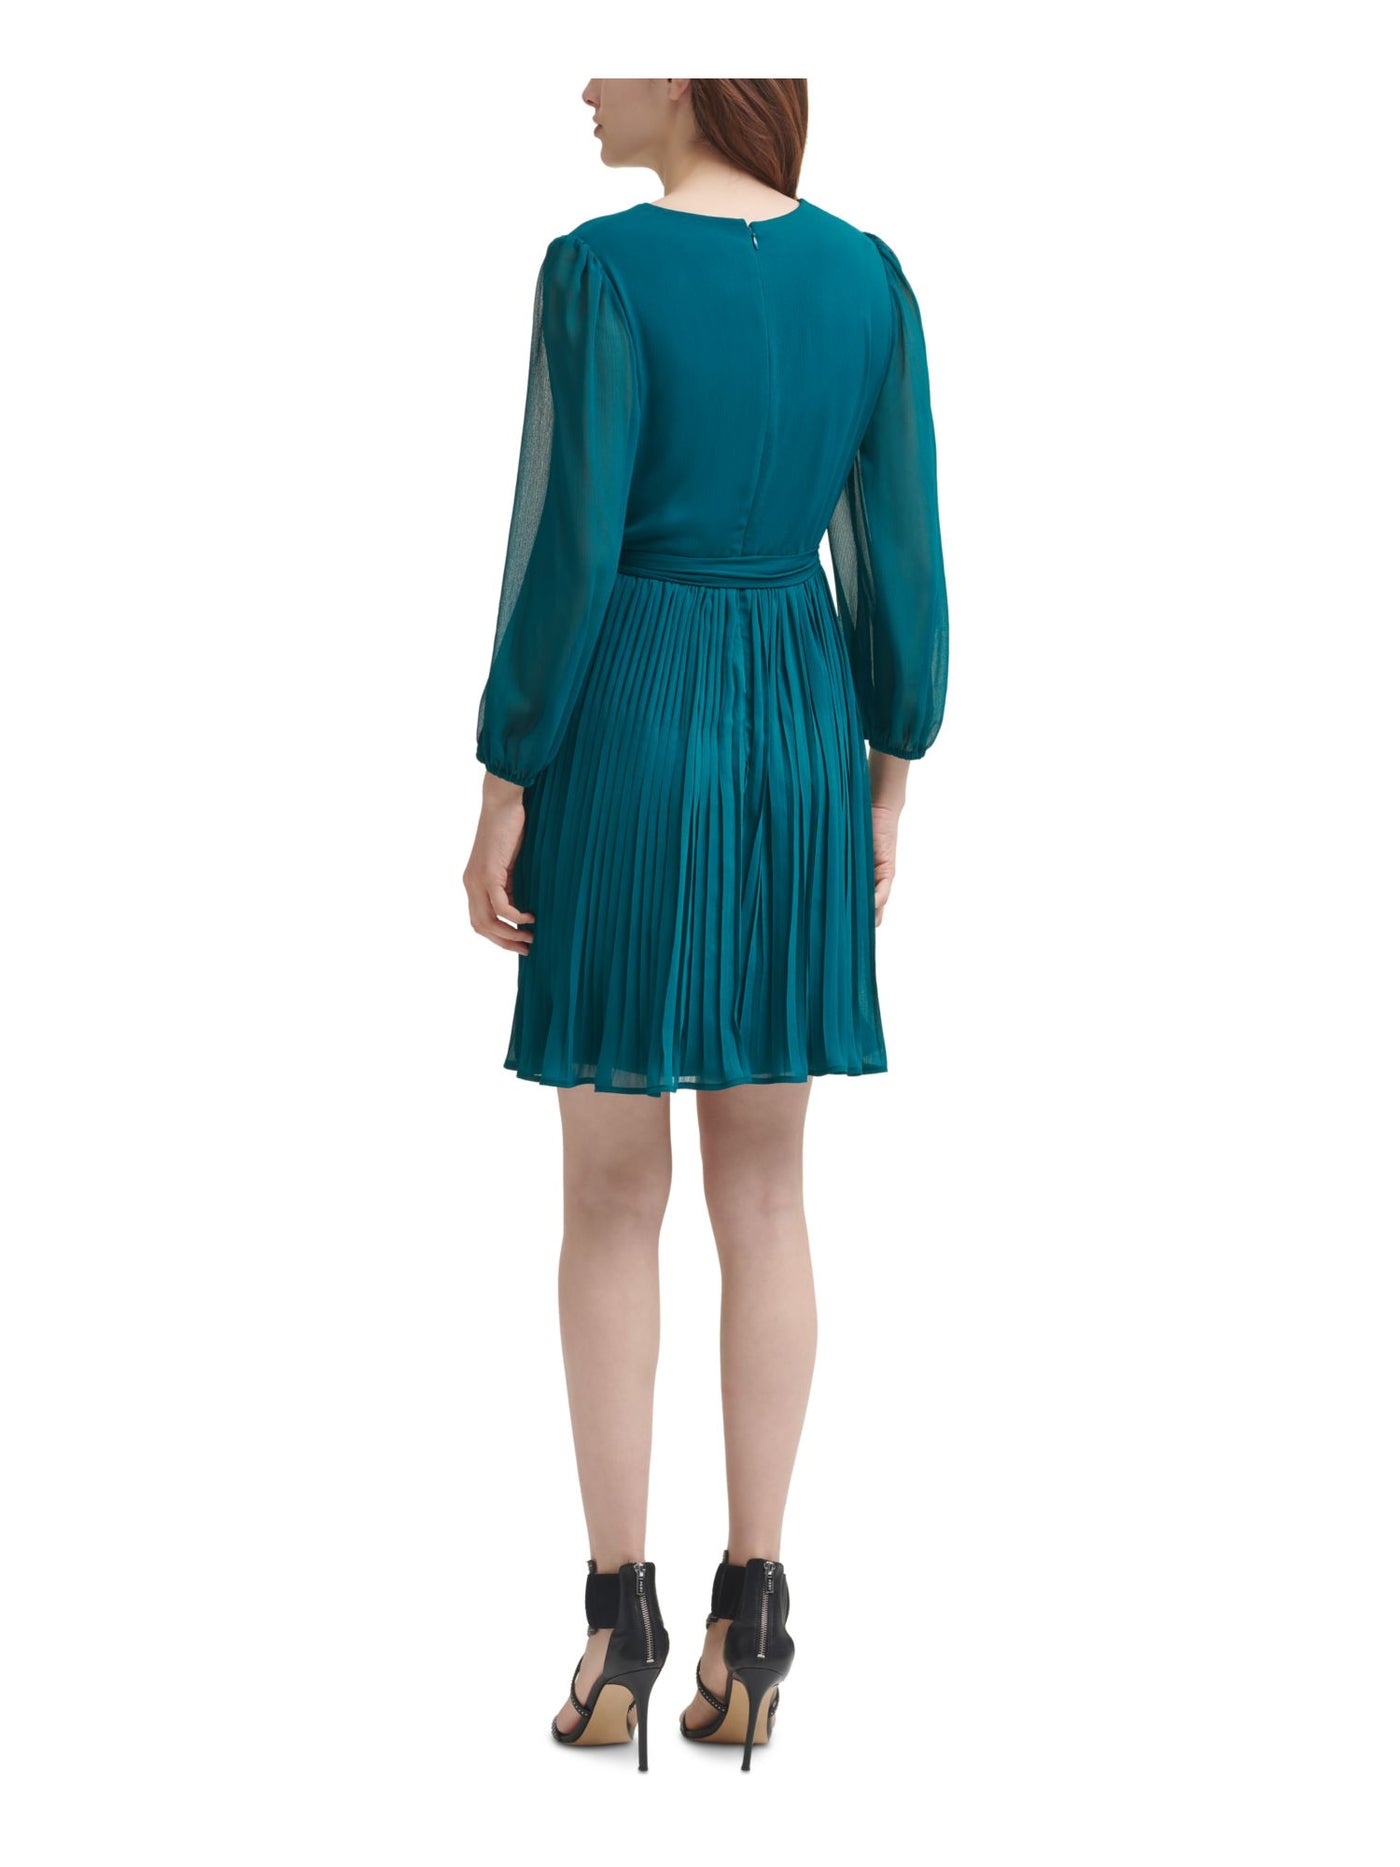 DKNY Womens Teal Tie Zippered Balloon Sleeve Surplice Neckline Above The Knee Cocktail Knife Pleated Dress 10